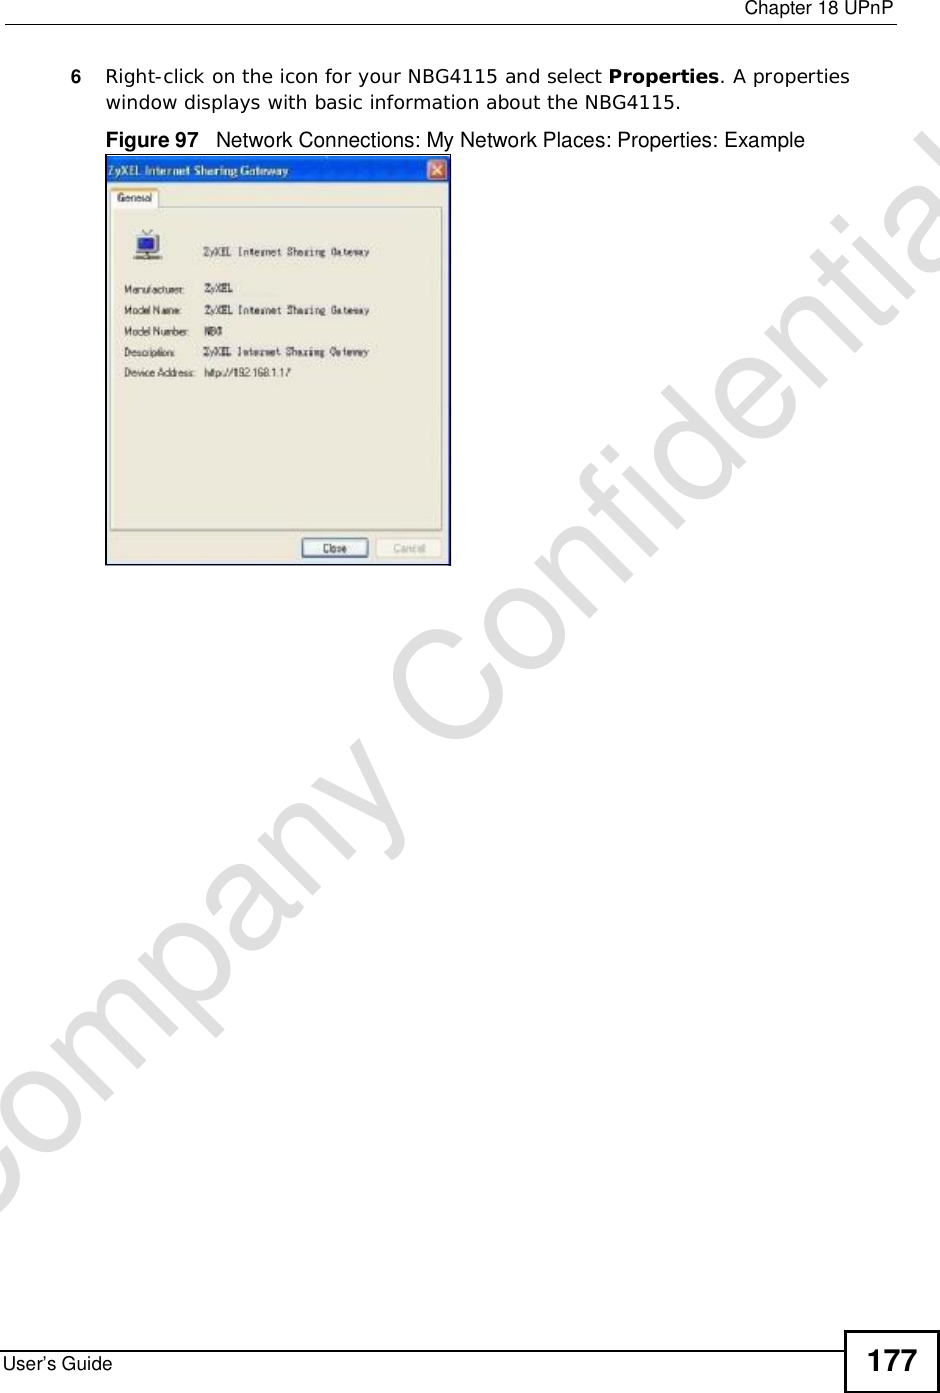  Chapter 18UPnPUser’s Guide 1776Right-click on the icon for your NBG4115 and select Properties. A properties window displays with basic information about the NBG4115. Figure 97   Network Connections: My Network Places: Properties: ExampleCompany Confidential